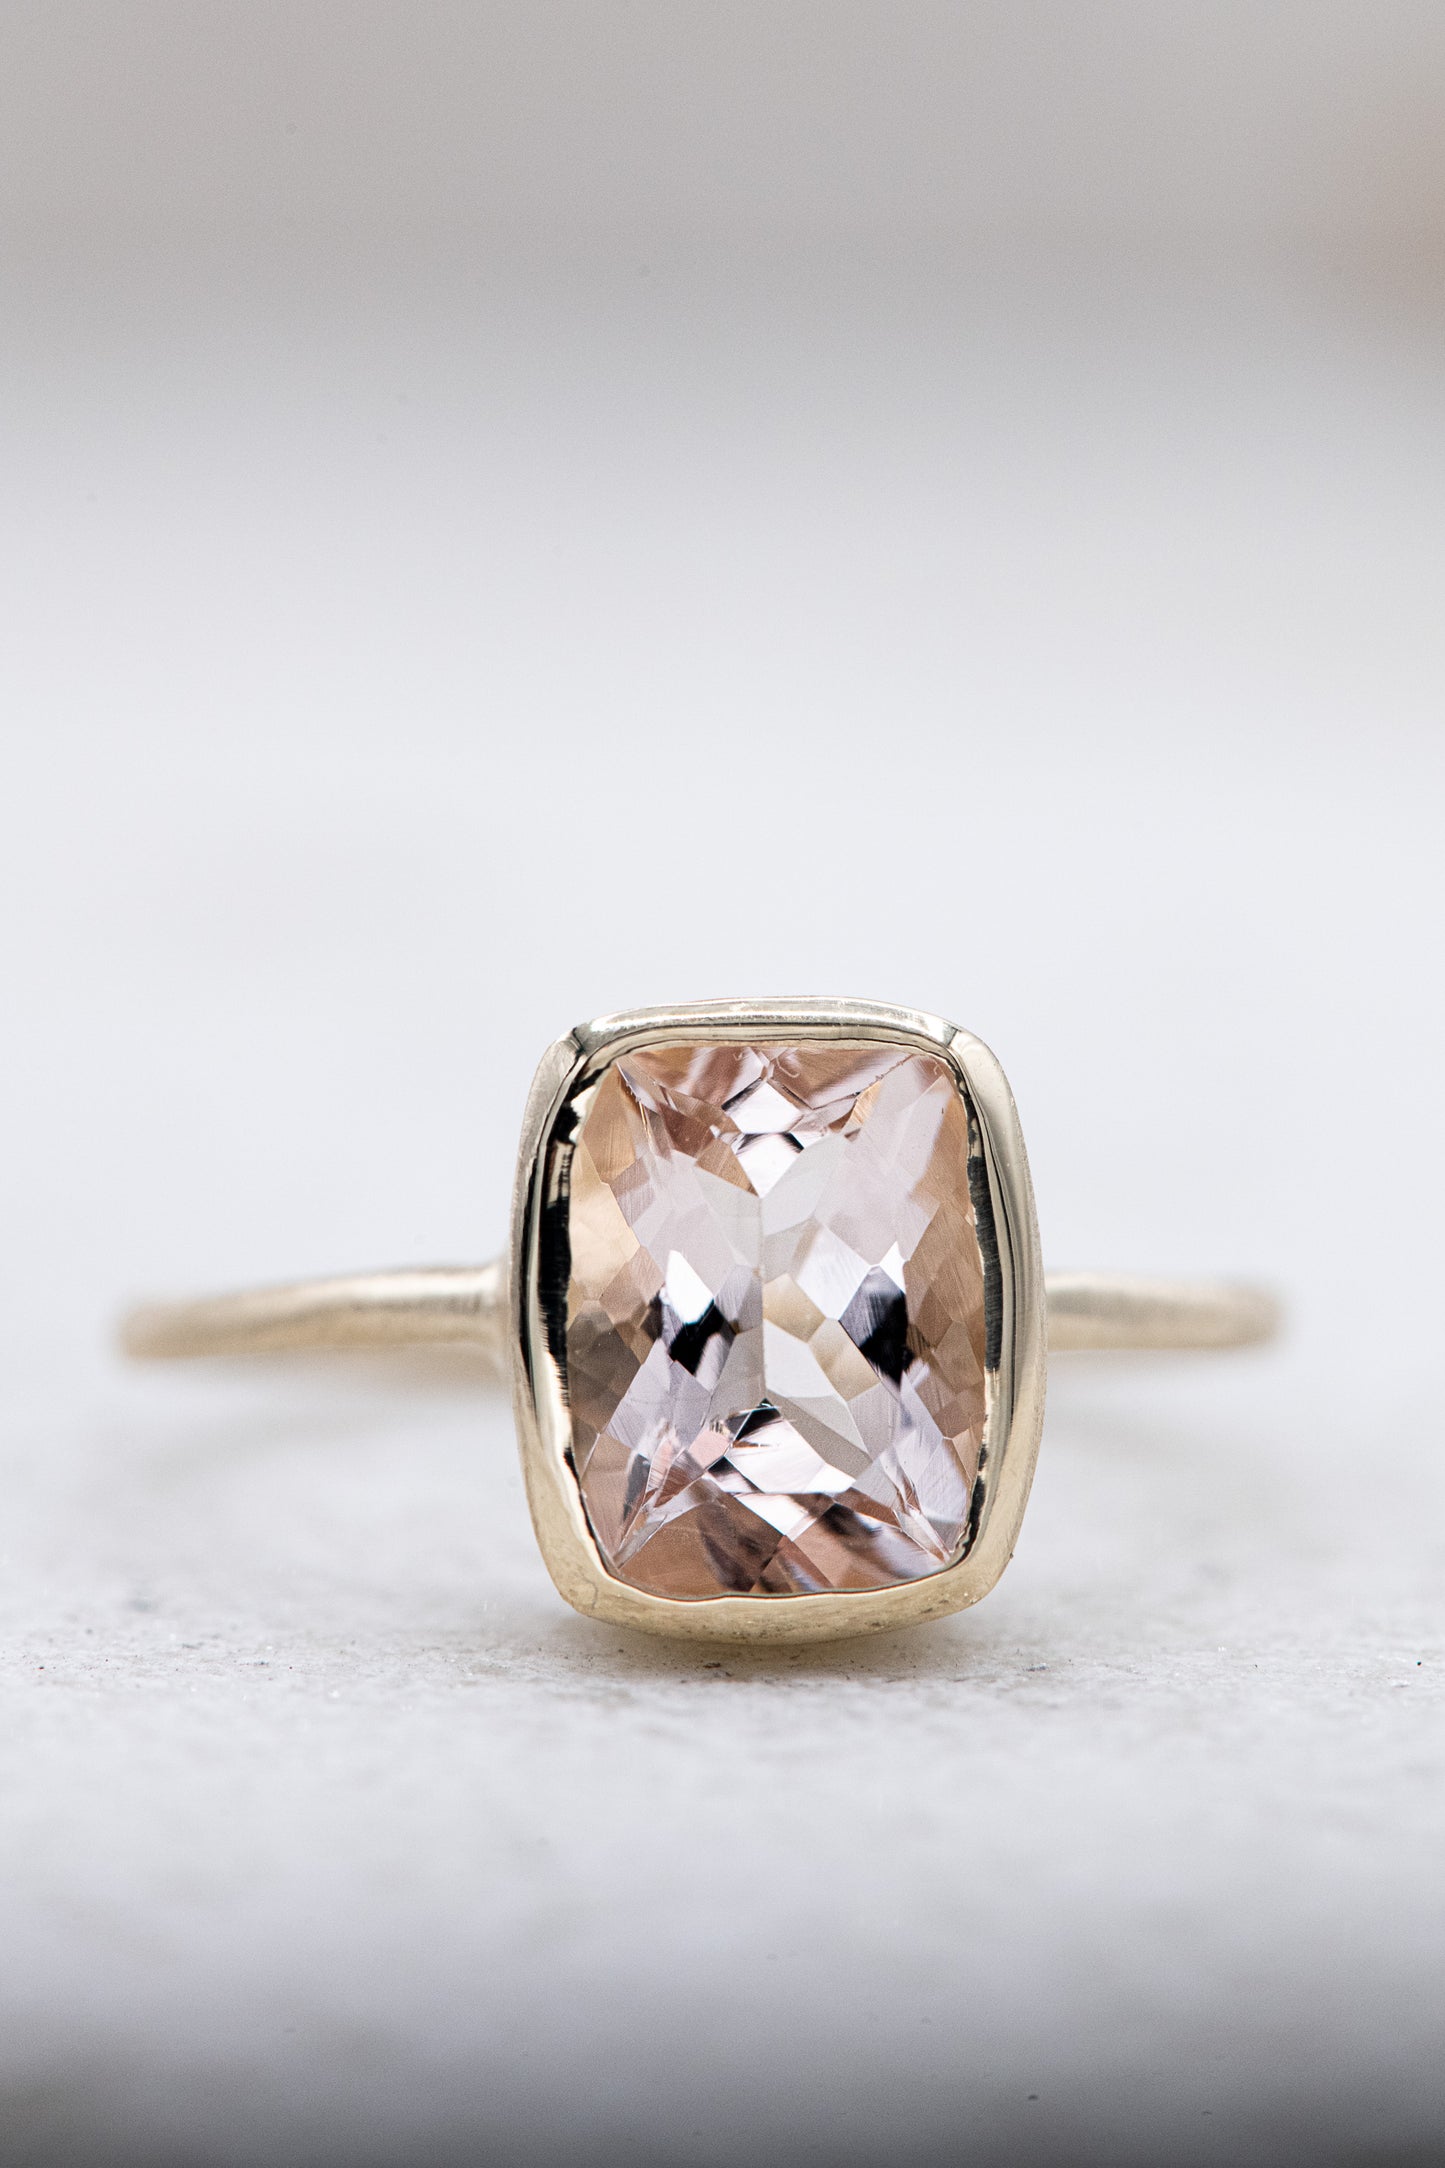 A handmade Yellow Gold and Morganite Ring with a cushion cut morganite from Cassin Jewelry.